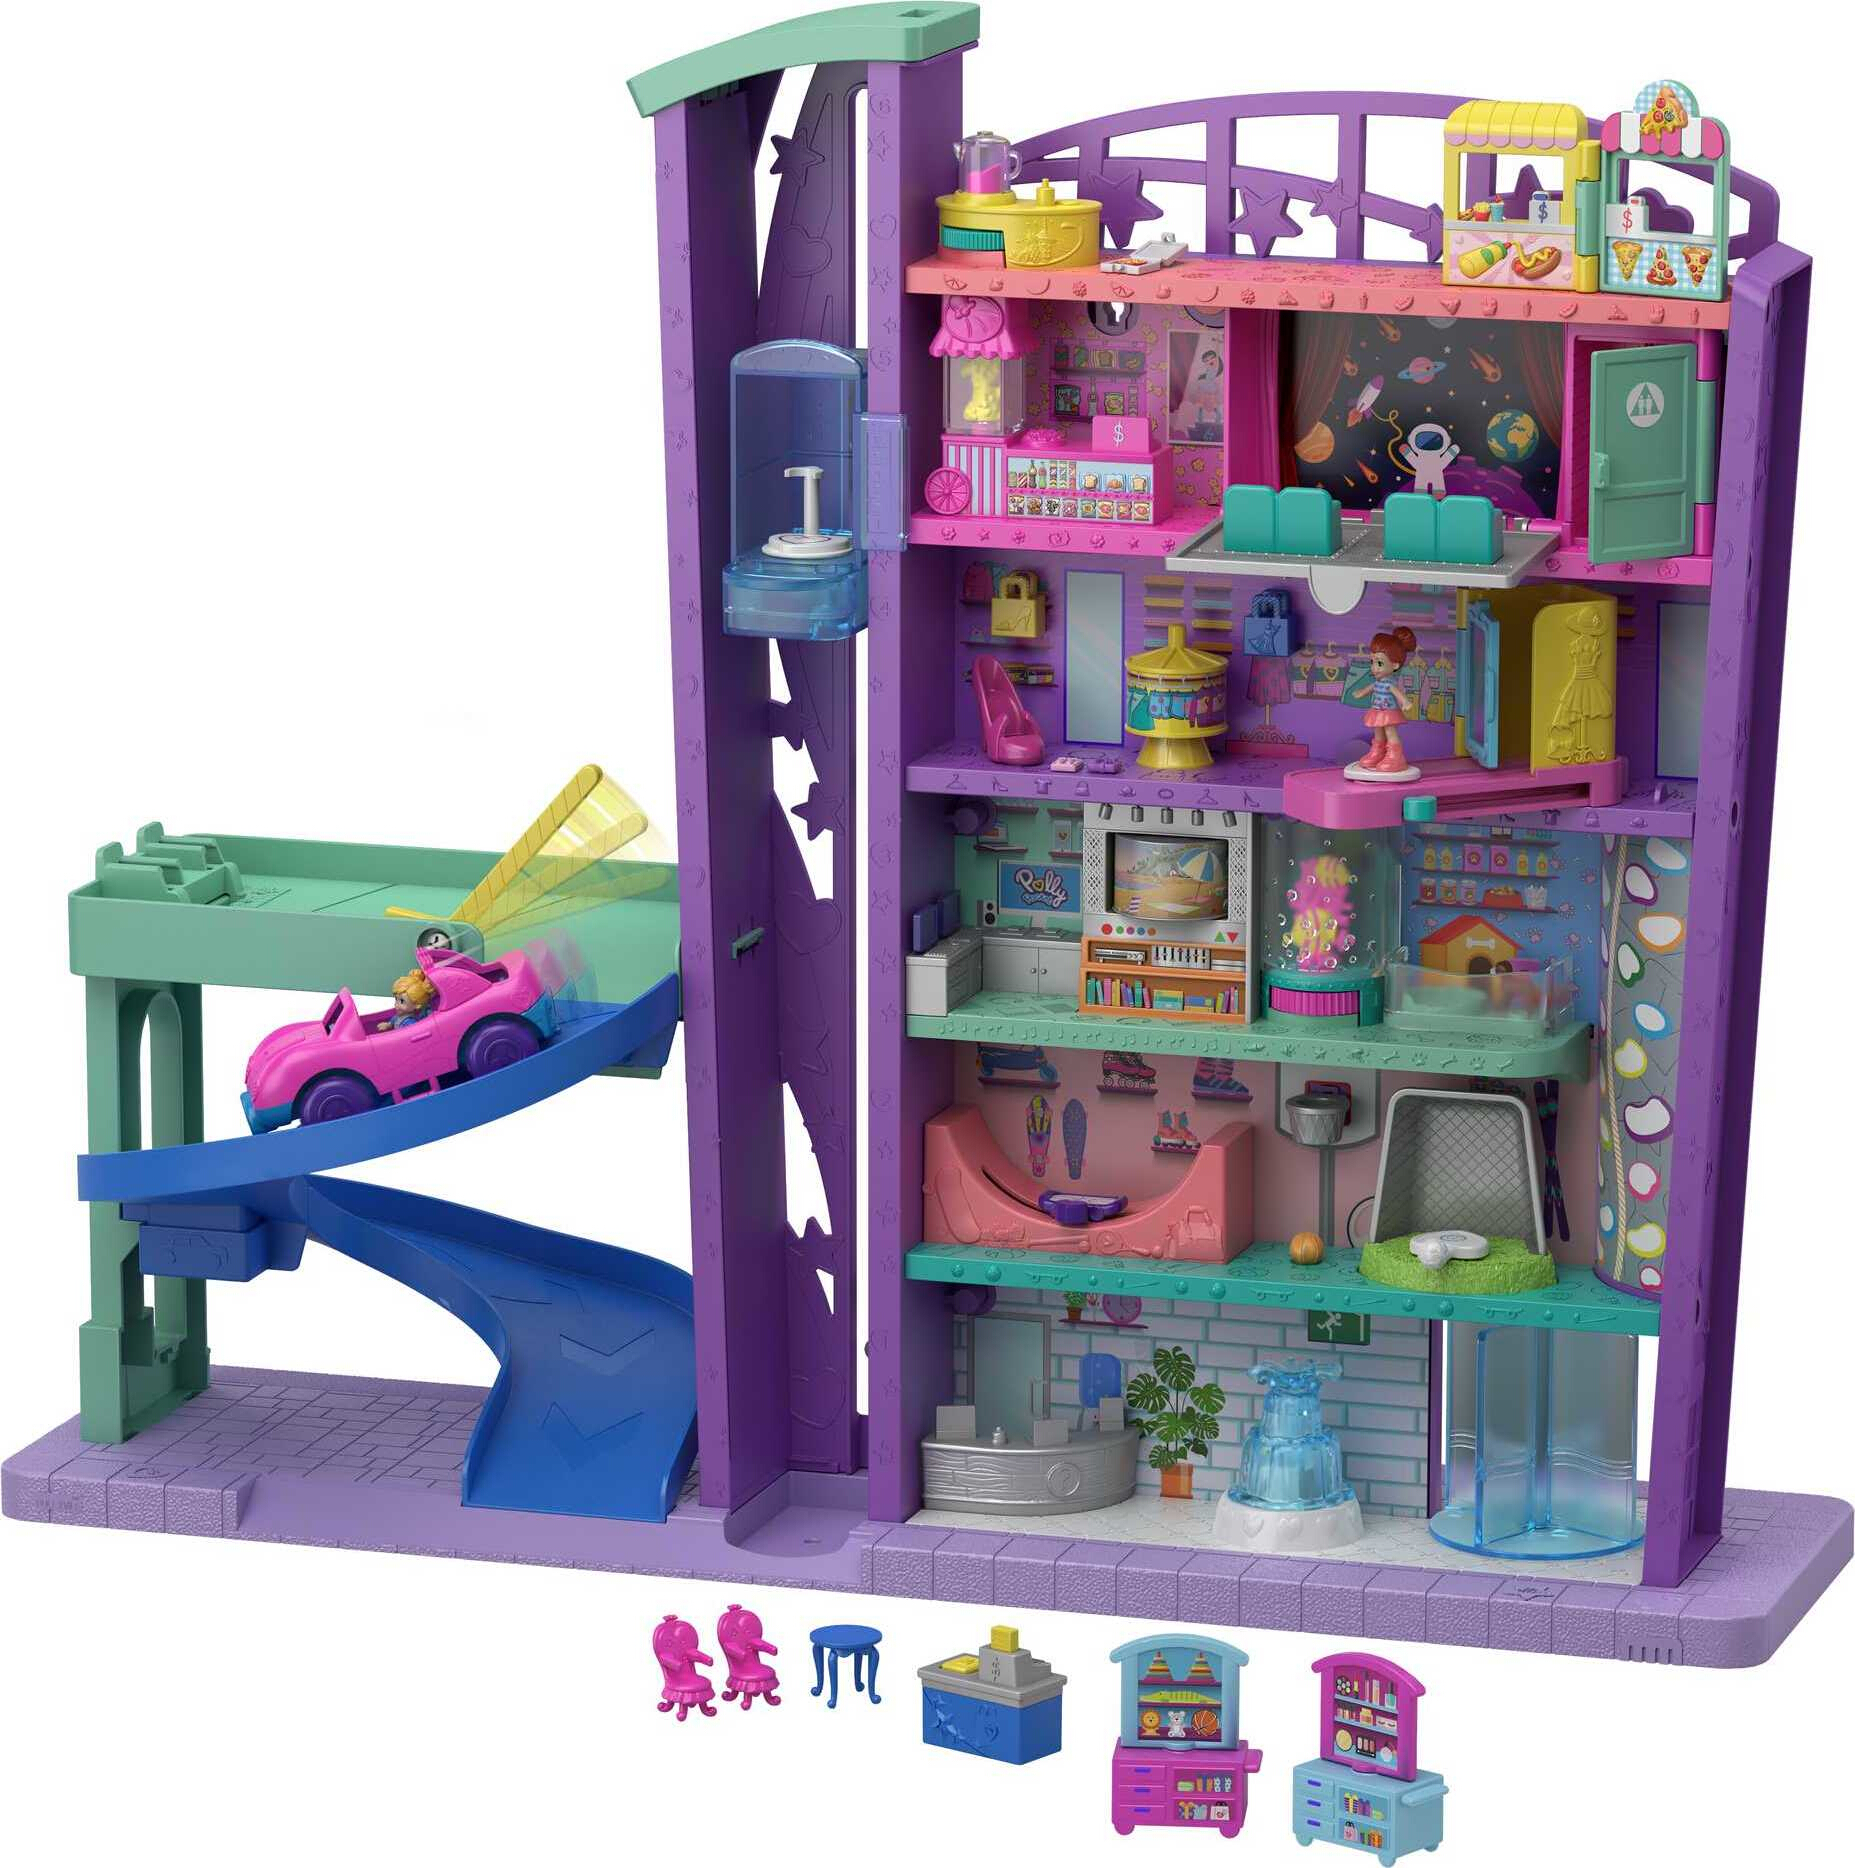 Polly Pocket Pollyville Mega Mall Playset With Themed Accessories - image 1 of 7